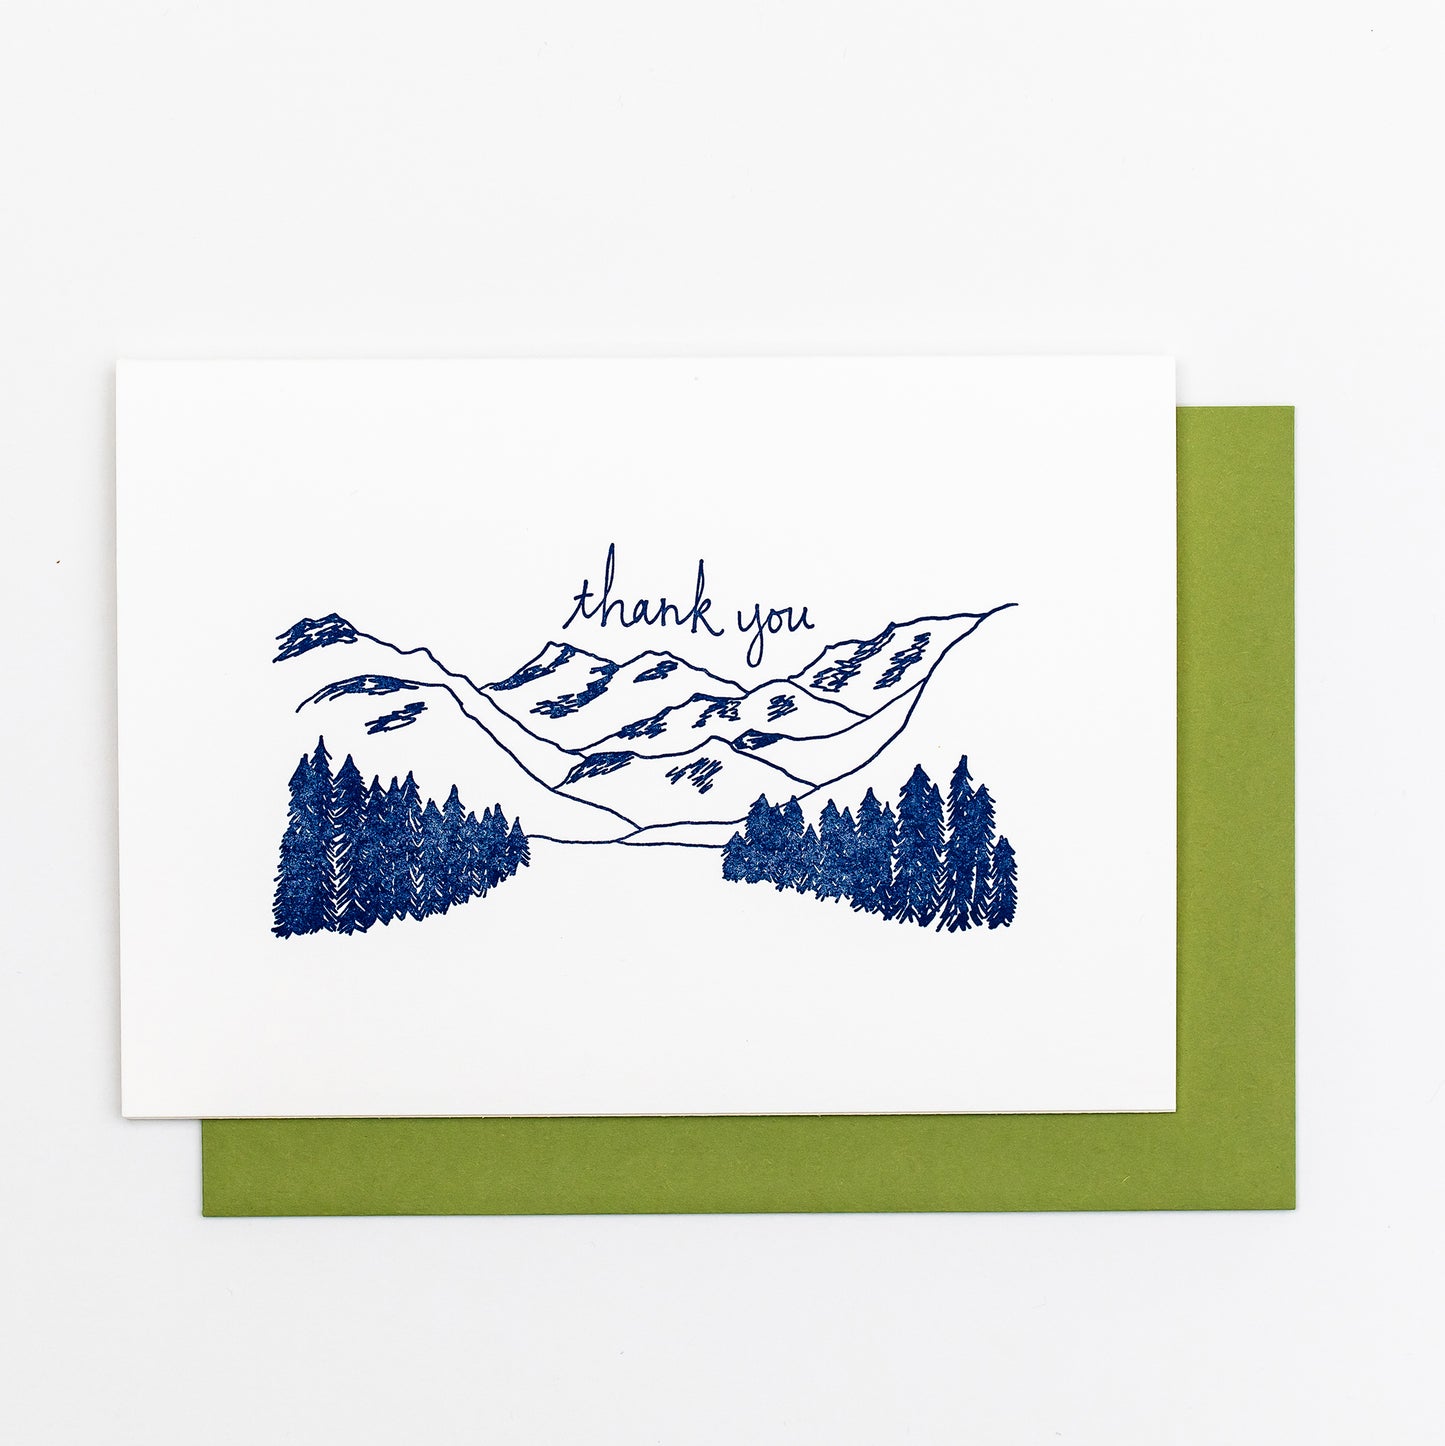 Letterpress greeting card featuring hand-drawn mountain landcape, printed in a rich navy ink. Whimsical hand-drawn text saying "Thank you" is shown above the moutains, in the same navy ink. The card is white, blank inside, and is paired with a rich green envelope.